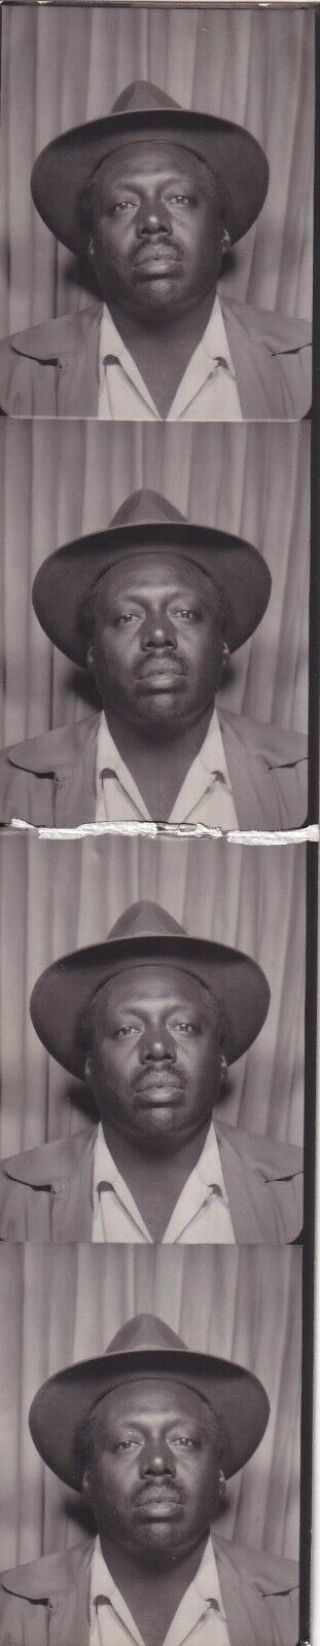 Vintage Photo Booth - Strip - Serious African - American Man,  Same Exact Expression